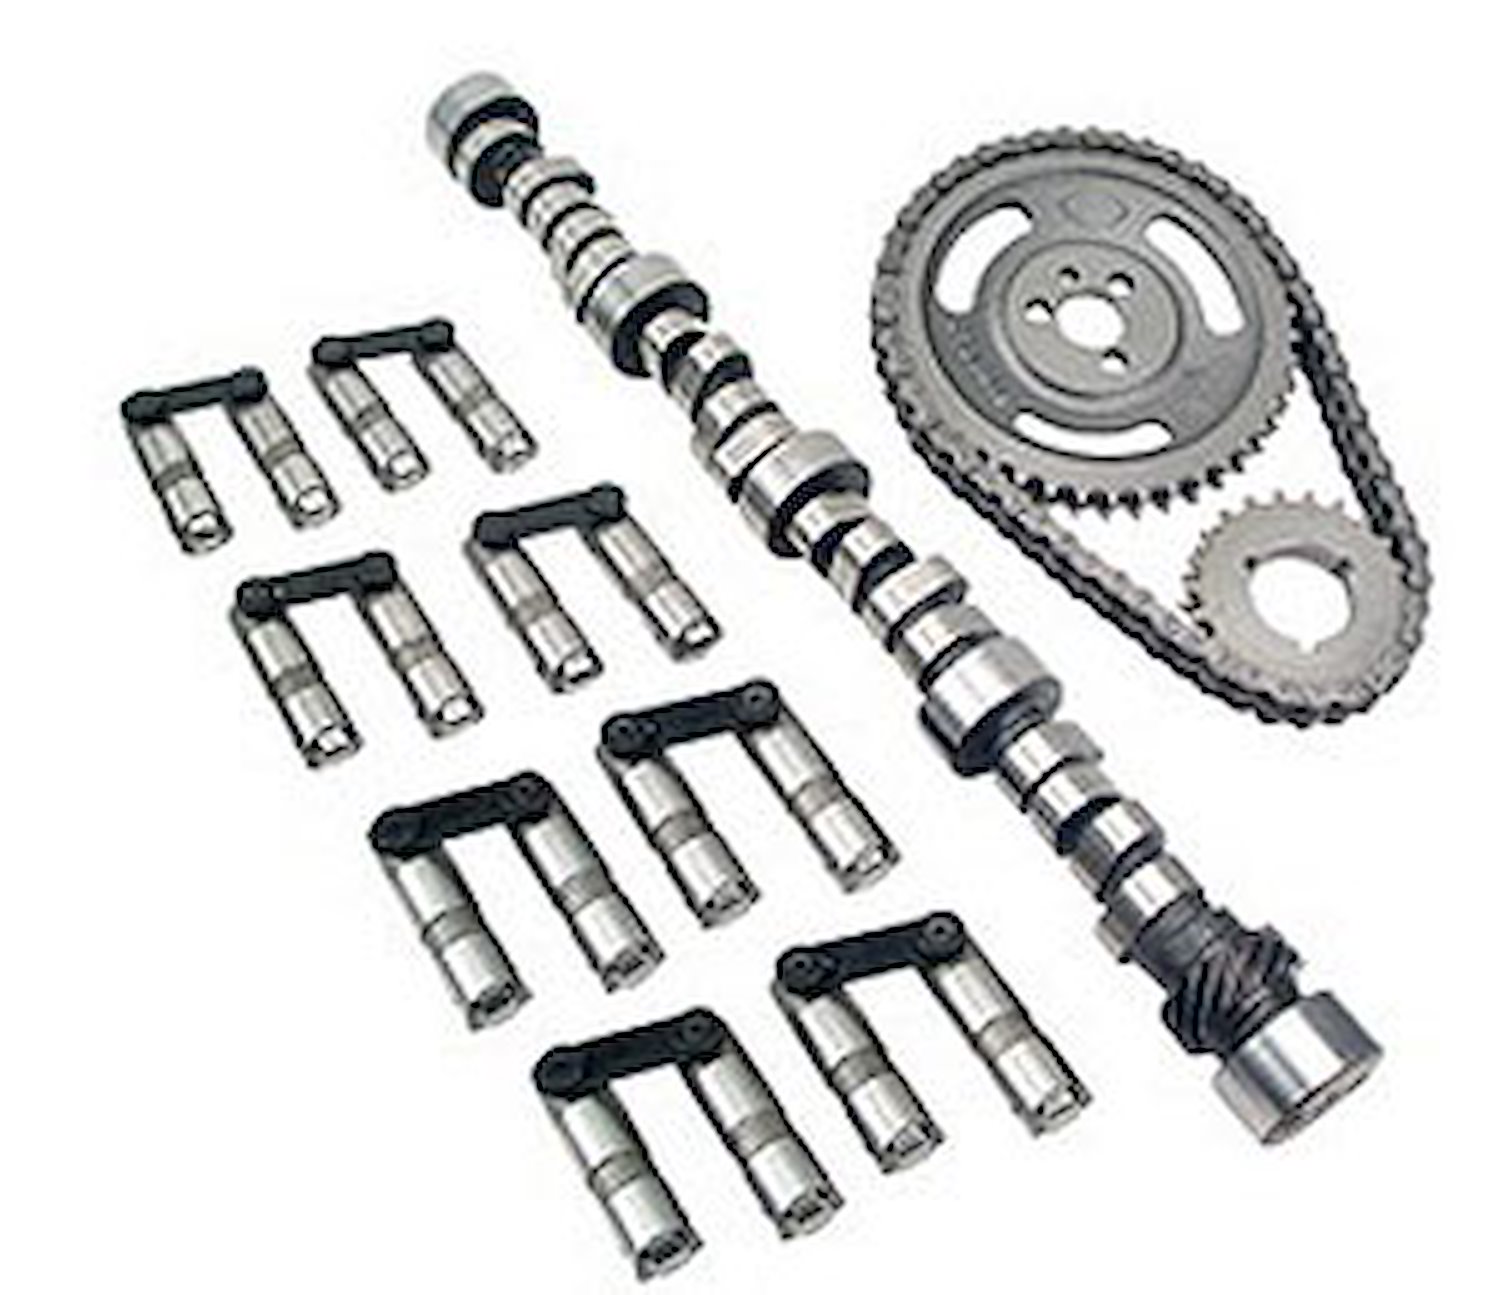 XFI Hydraulic Roller Camshaft Small Kit Small Block Chevy 305/350 1987-98 Lift: .550"/.546" With 1.6 Rockers